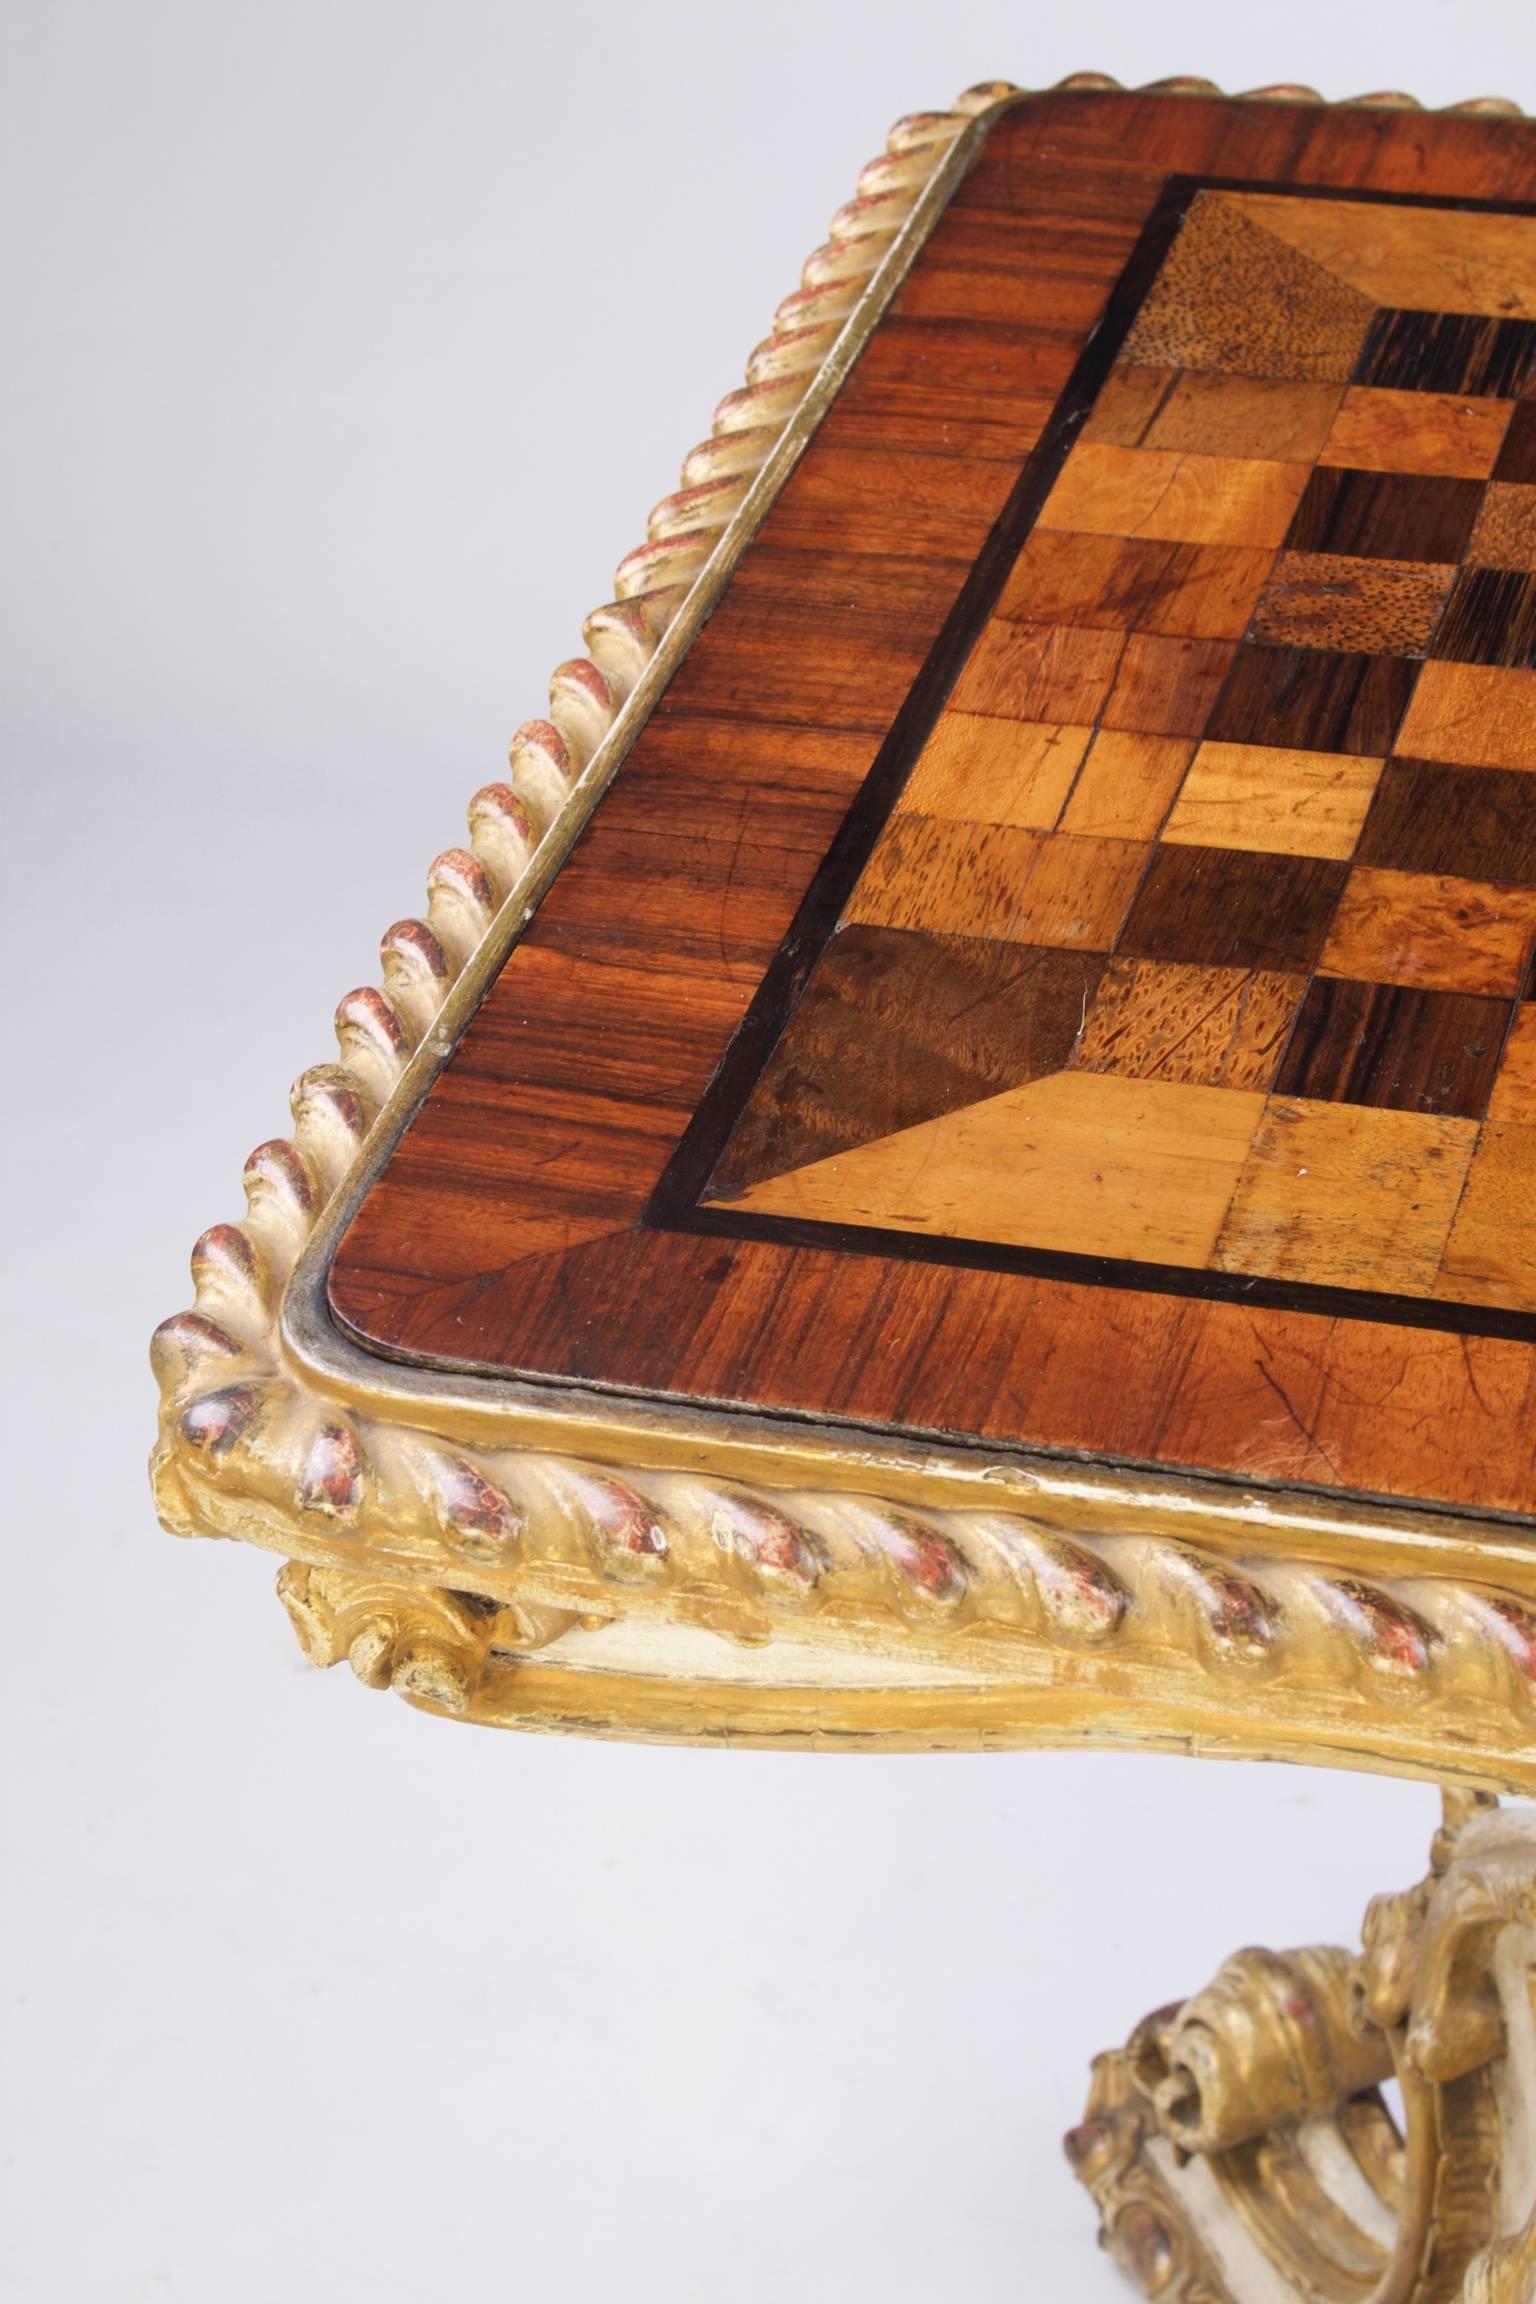 A fine quality specimen wood games table veneered with exotic timbers including East Indian satinwood, amboyna, palmwood, purplewood, and tigerwood. All inset within ebony banding and two inch South American rosewood cross banding and surrounded by